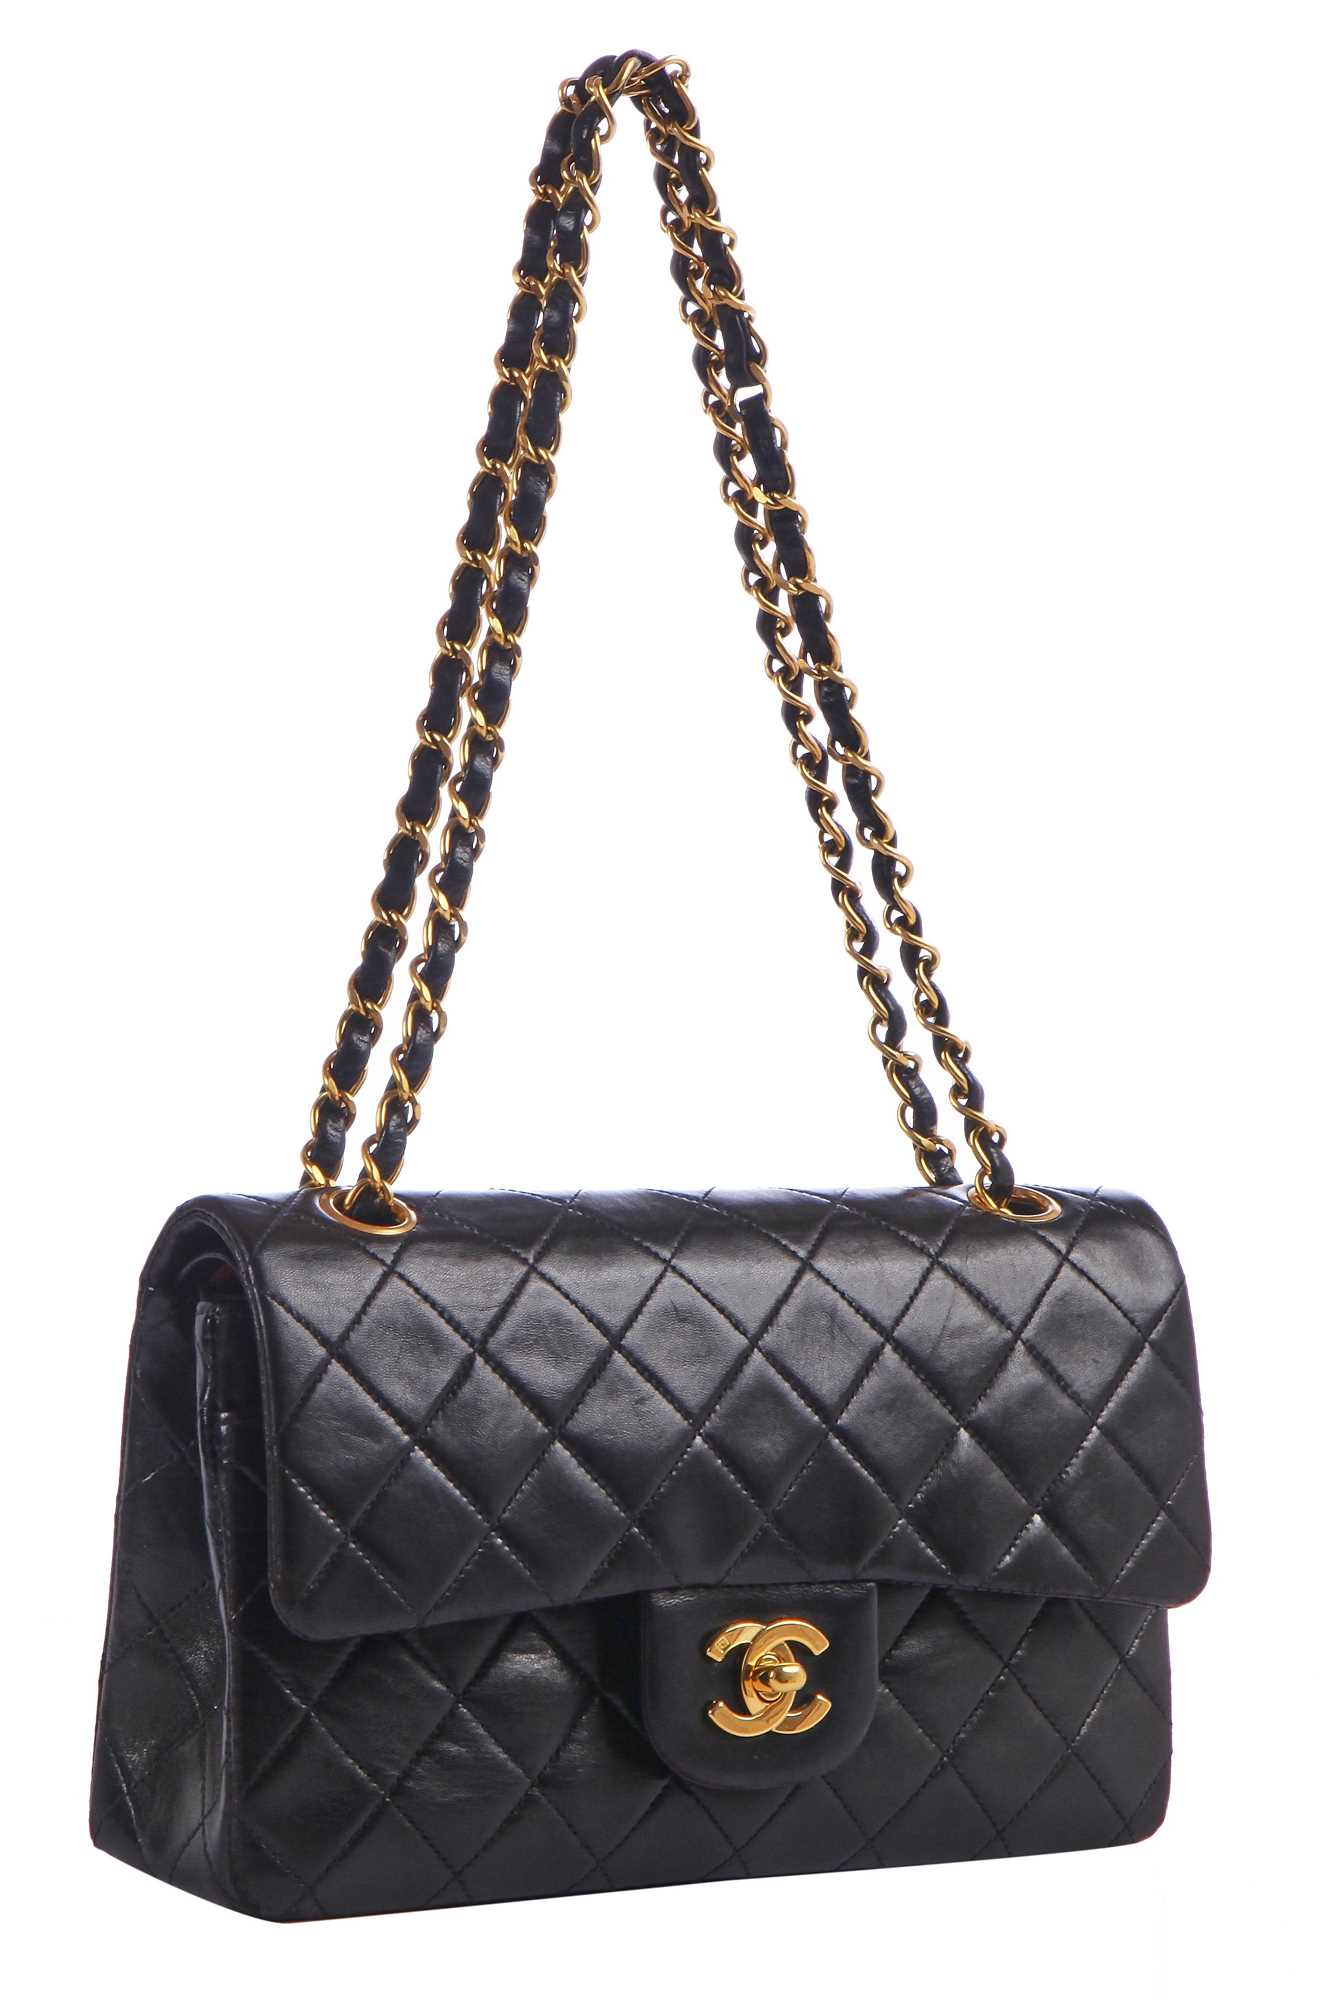 Lot 10 - A Chanel quilted black lambskin leather